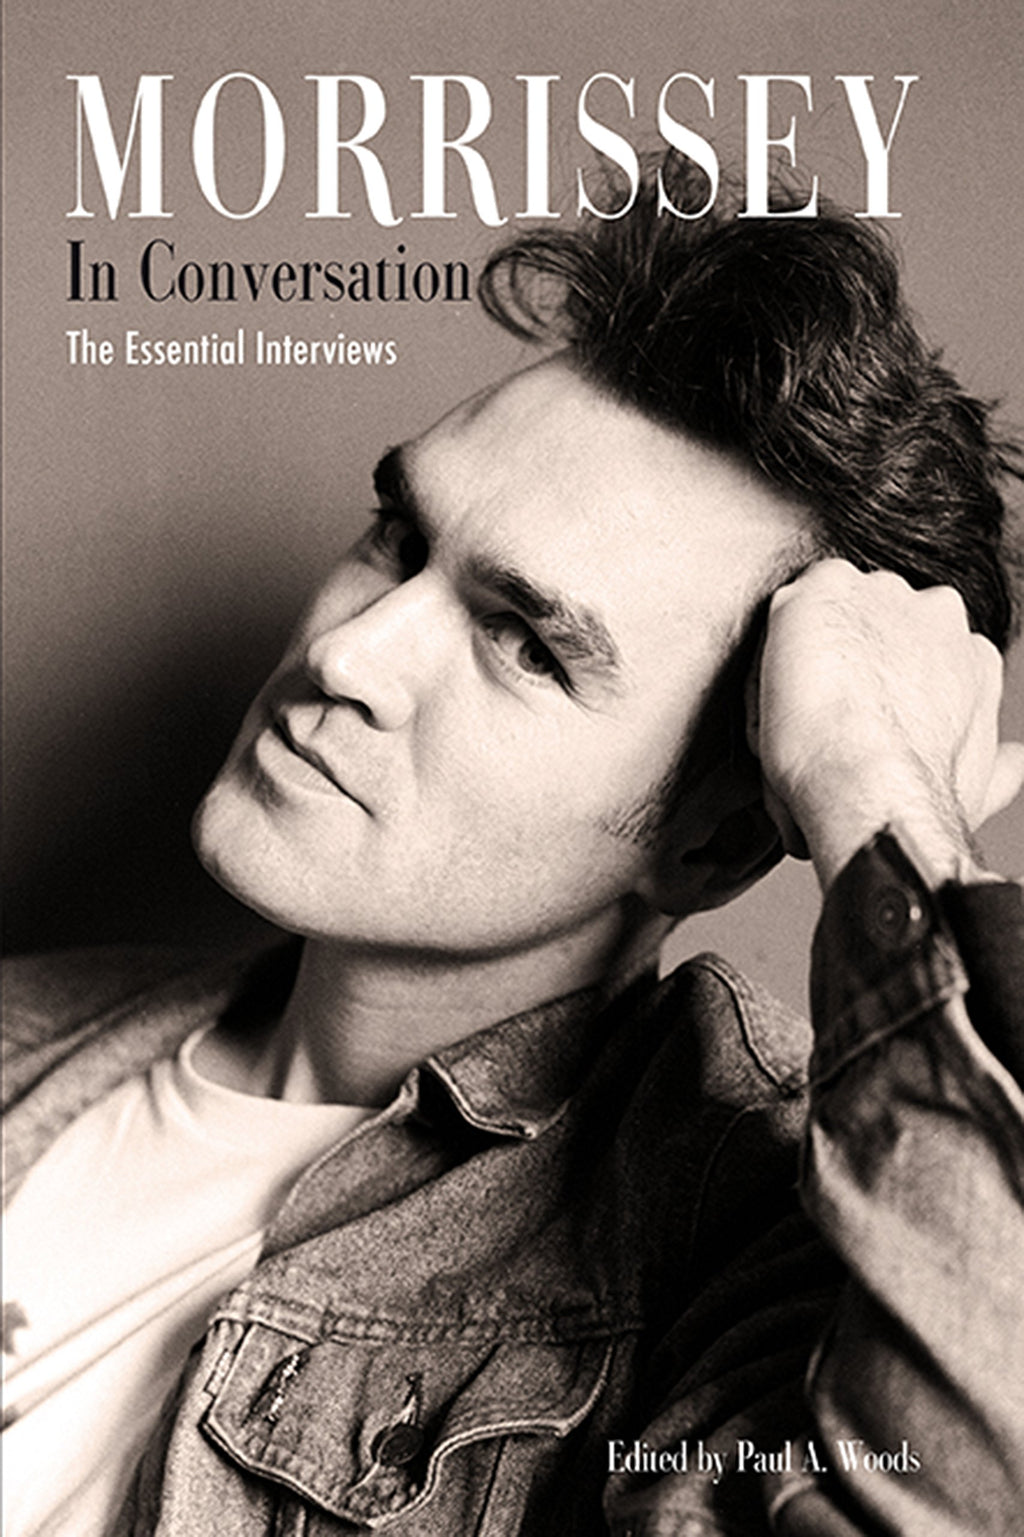 Morrissey in Conversation: The Essential Interviews by Paul A Woods